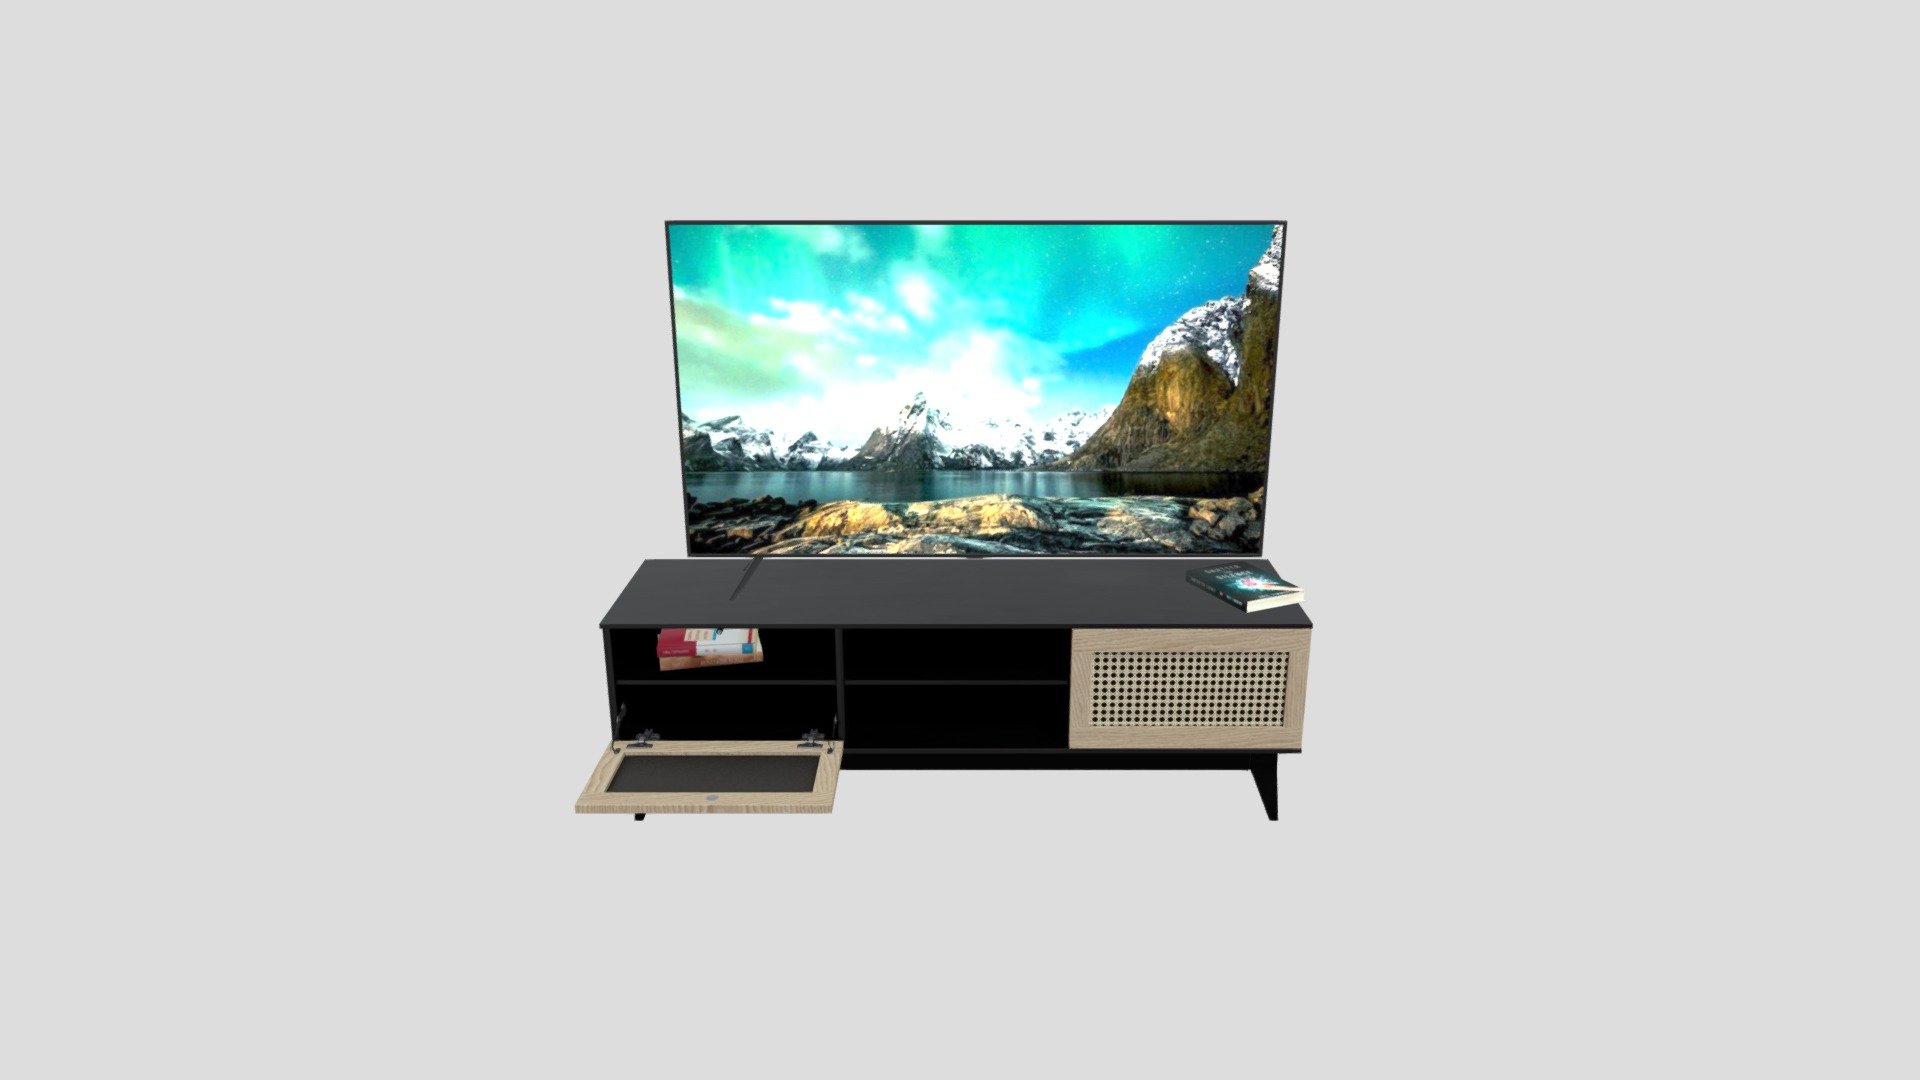 Hi, this is a TV STand model i did recently 3d model